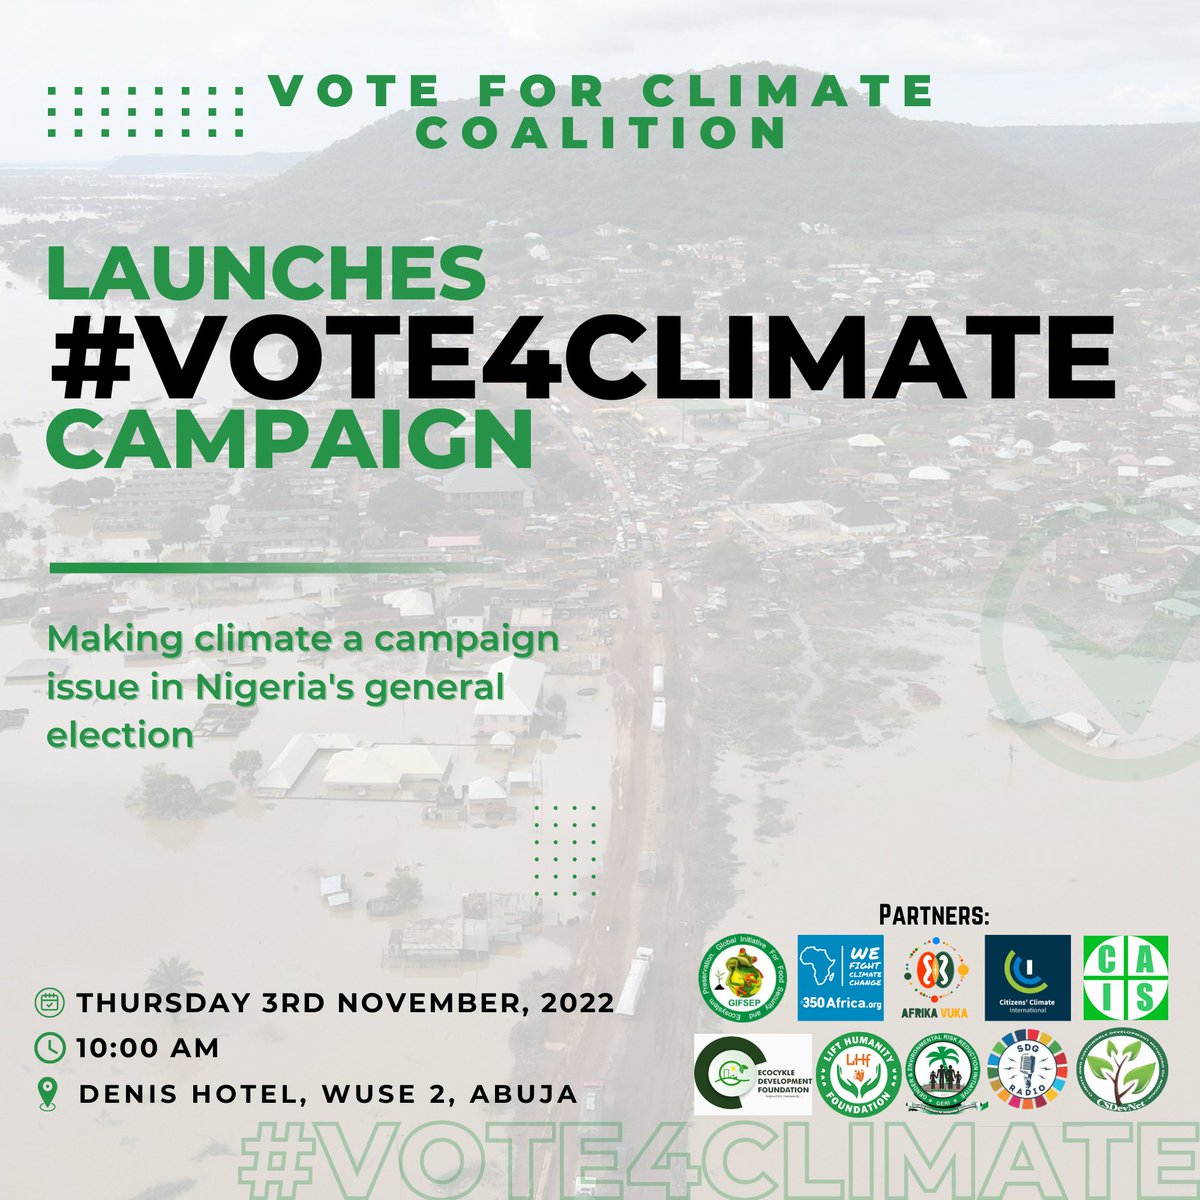 To vote is Climate Action Join us for the launch of the #Vote4Climate campaign. We will be mobilizing citizens across Nigeria especially those impacted by the #ClimateCrisis to #Vote for candidates with a an Action Plan for #Climate #Vote4Climate #AfrikaVuka @gifsep4climate